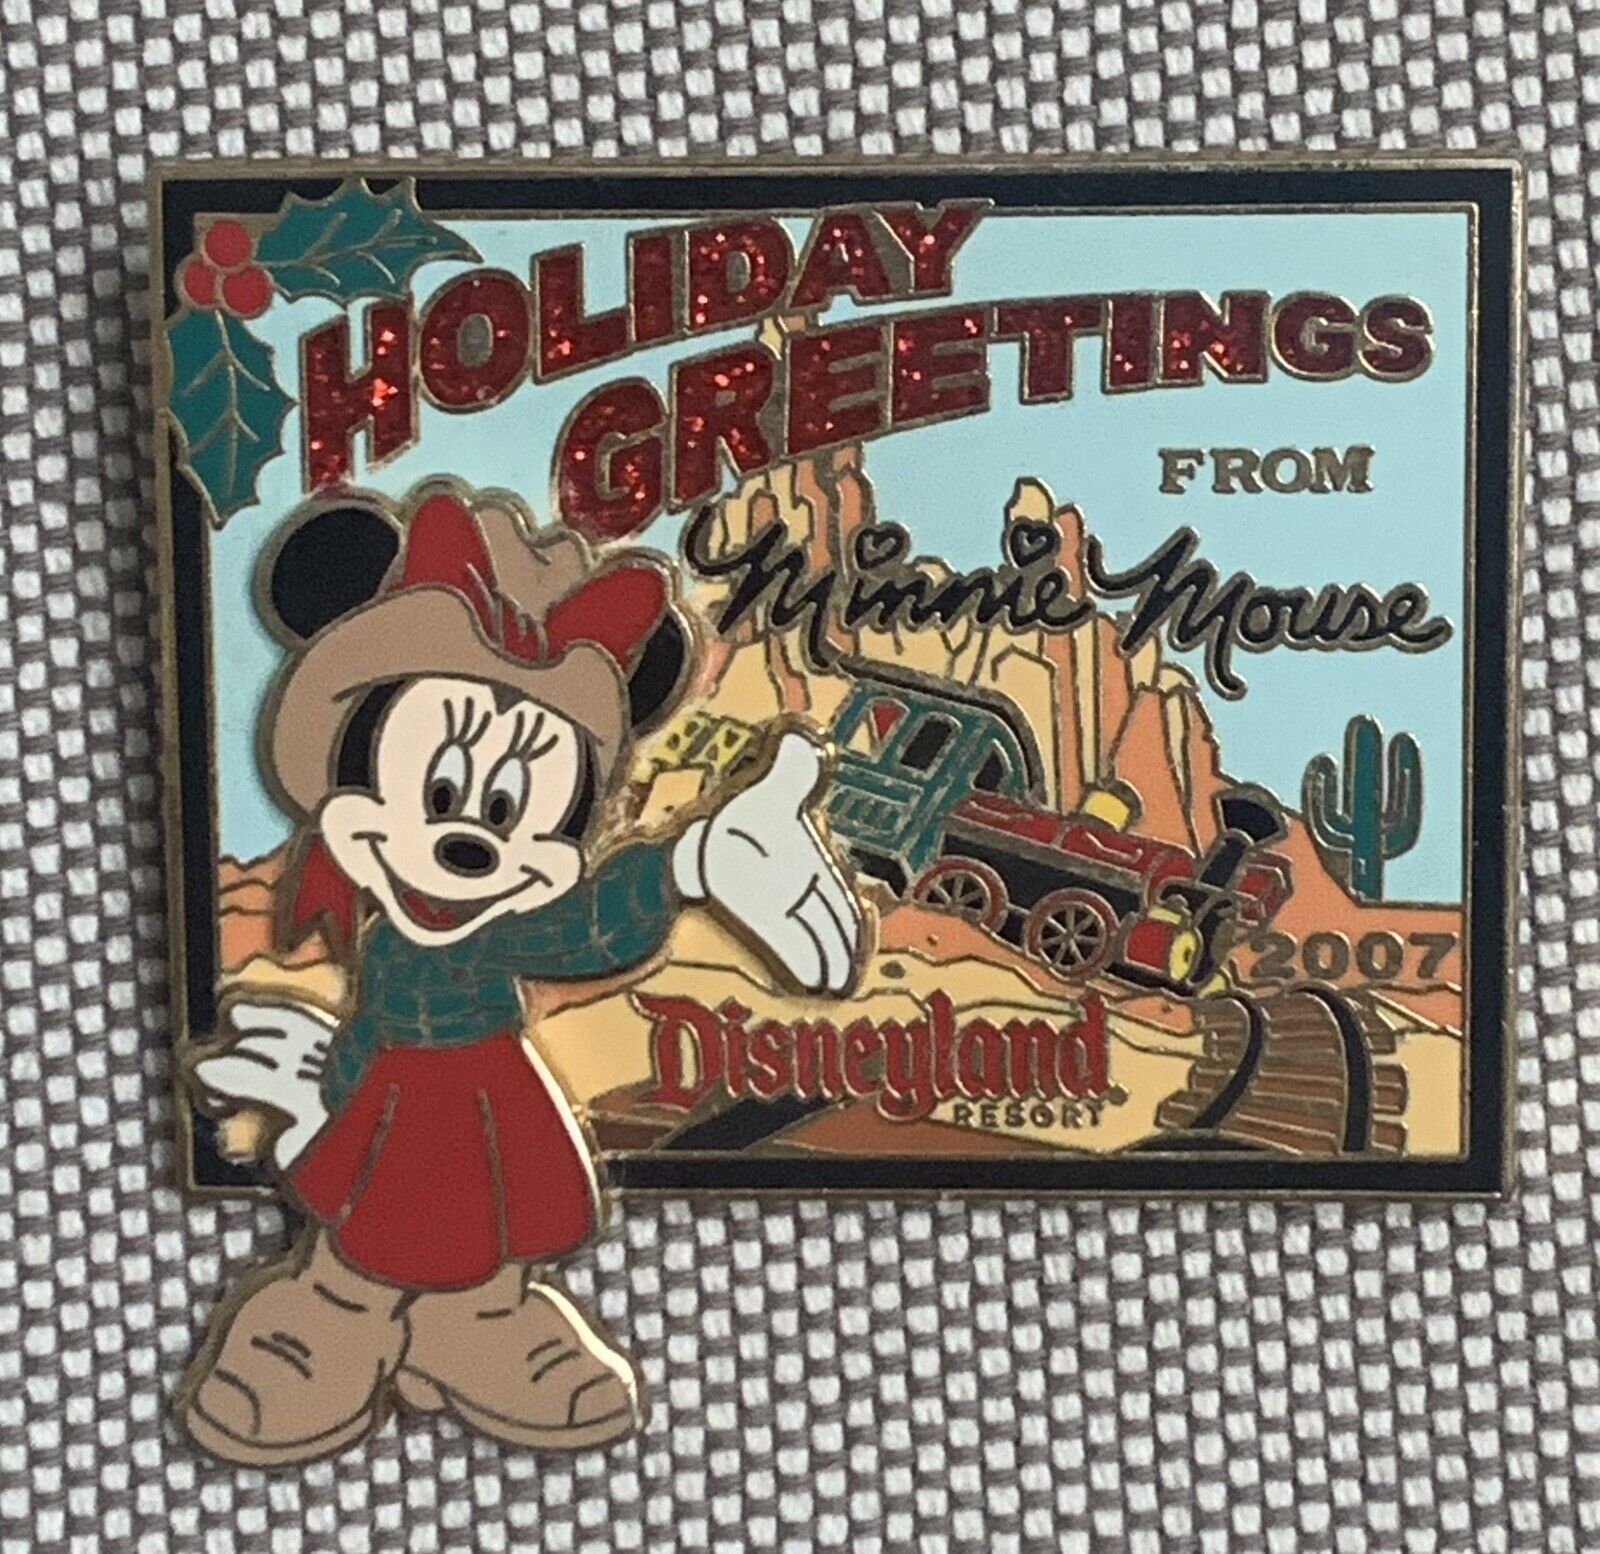 Disney Disneyland DLR 2007 Holiday Greetings From Minnie Mouse Postcard Pin LE